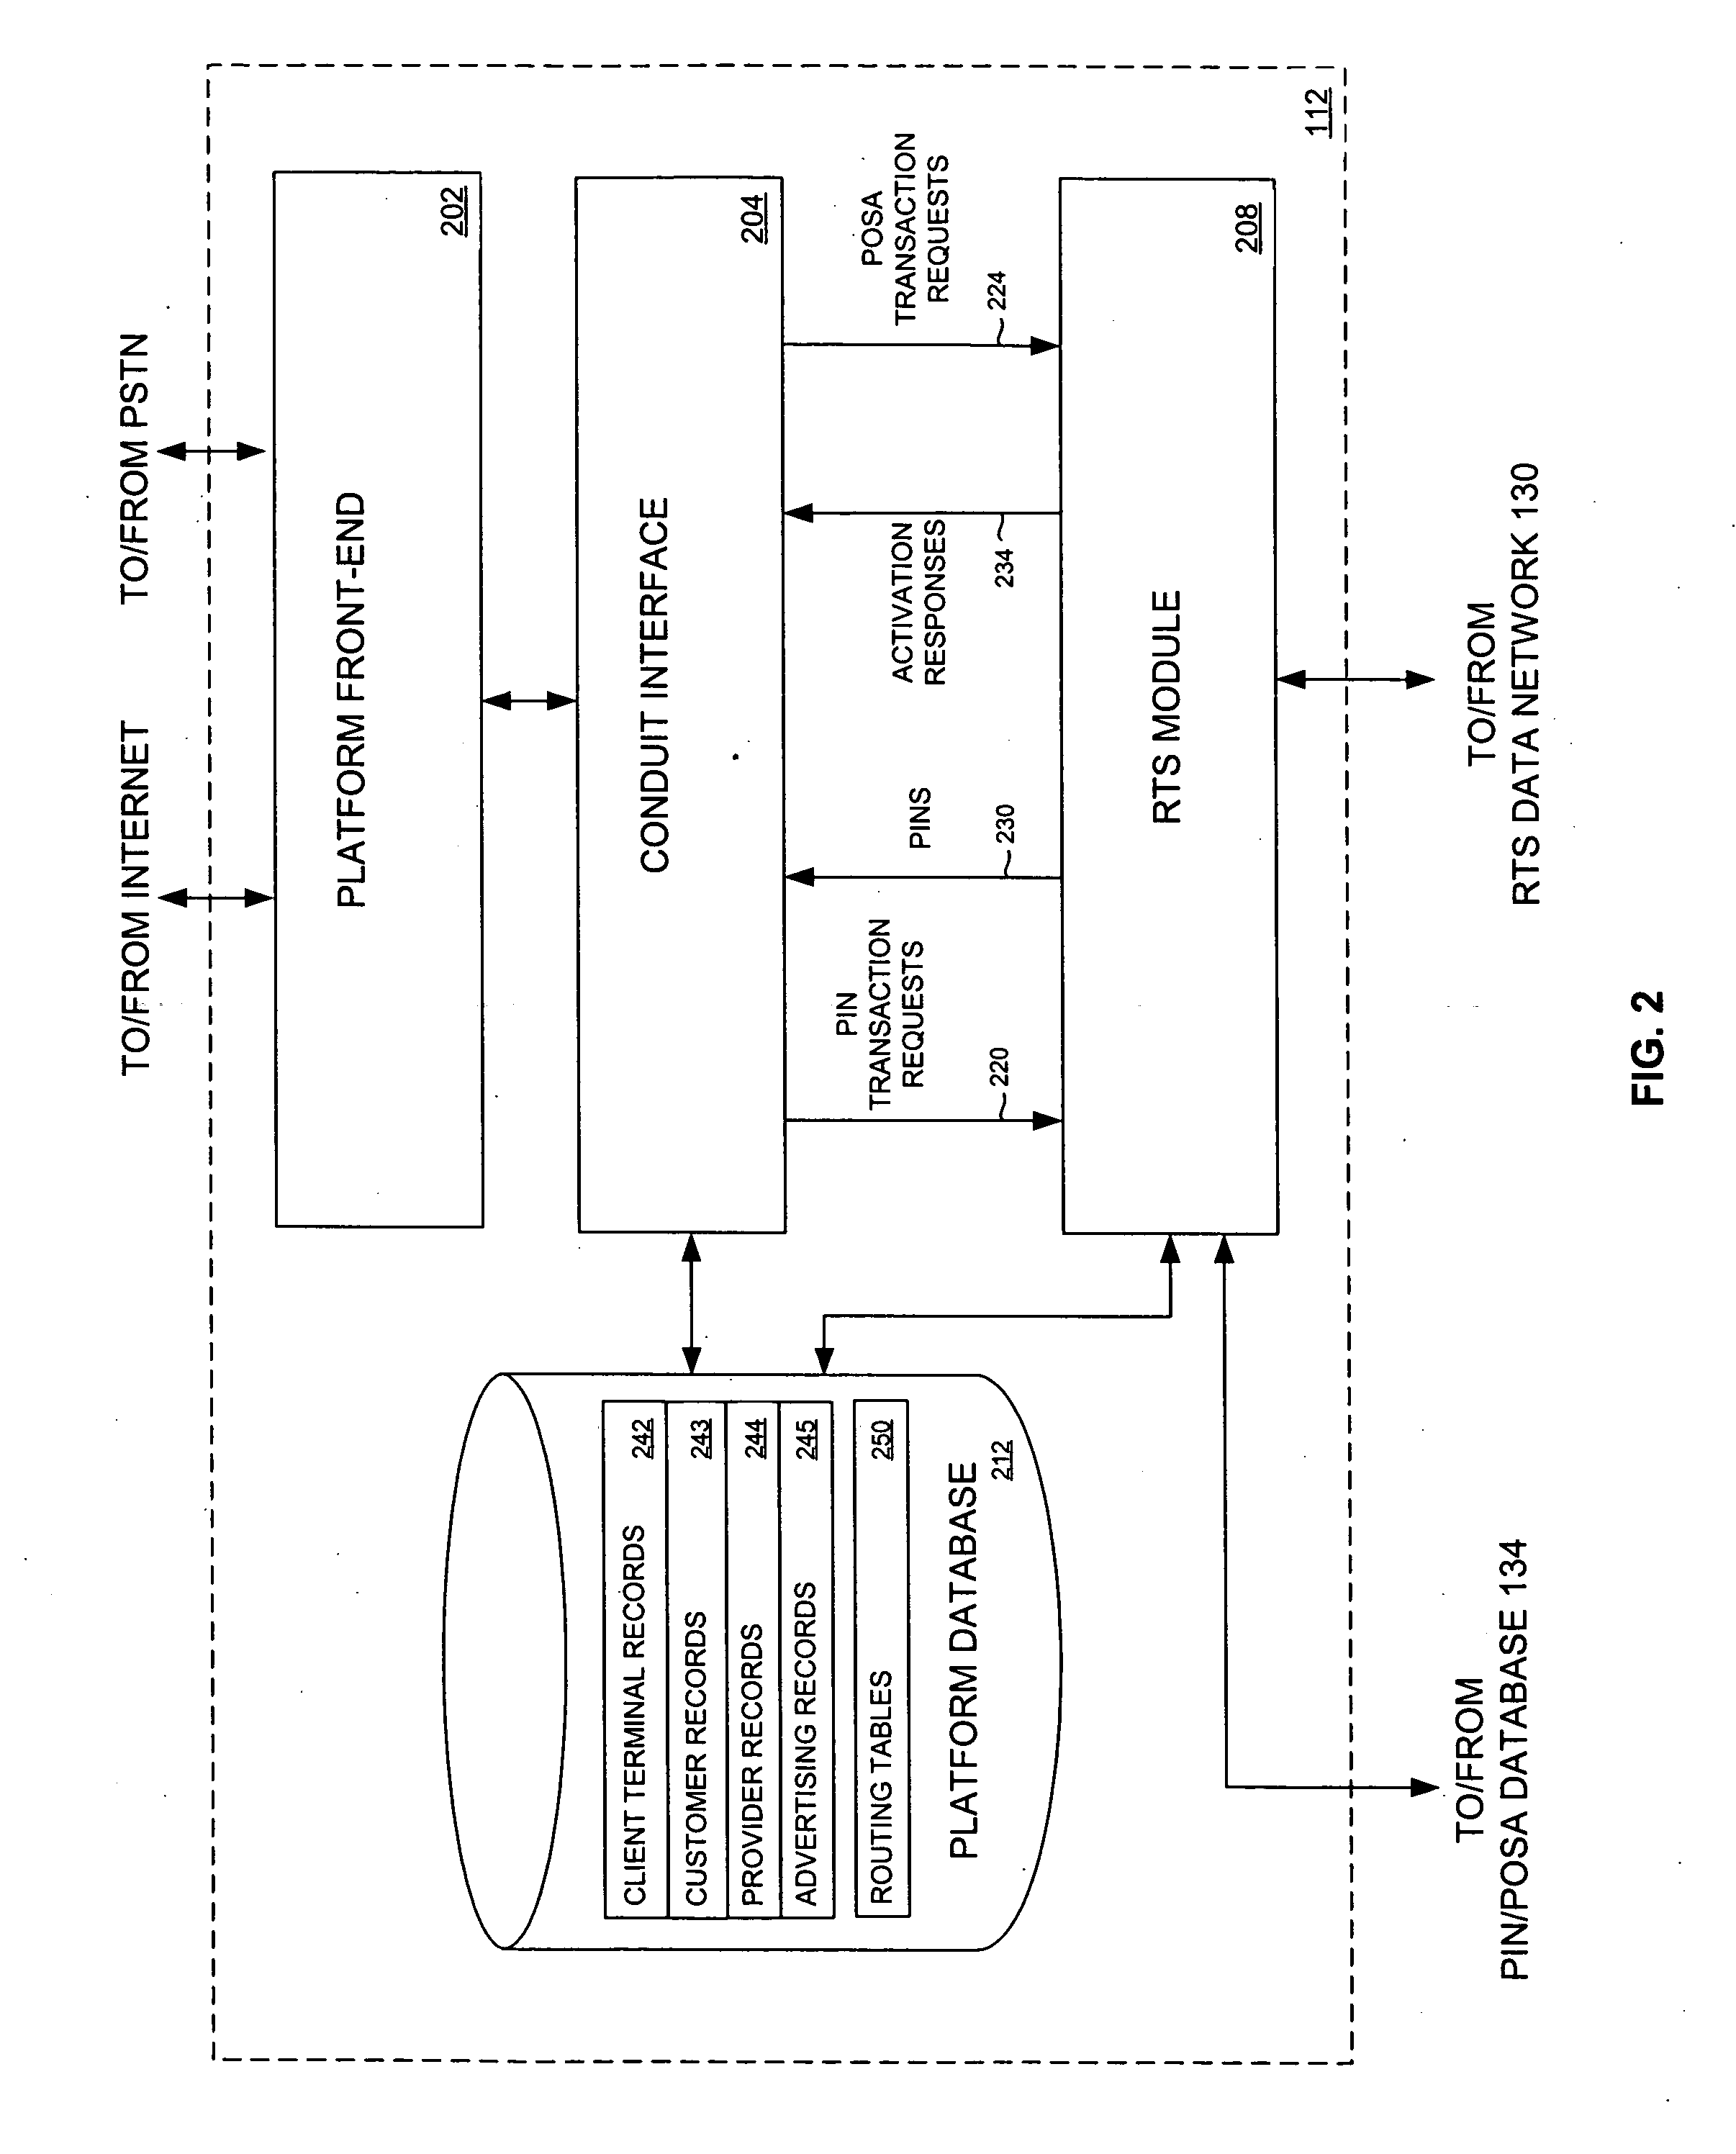 Transaction processing platform for faciliating electronic distribution of plural prepaid services